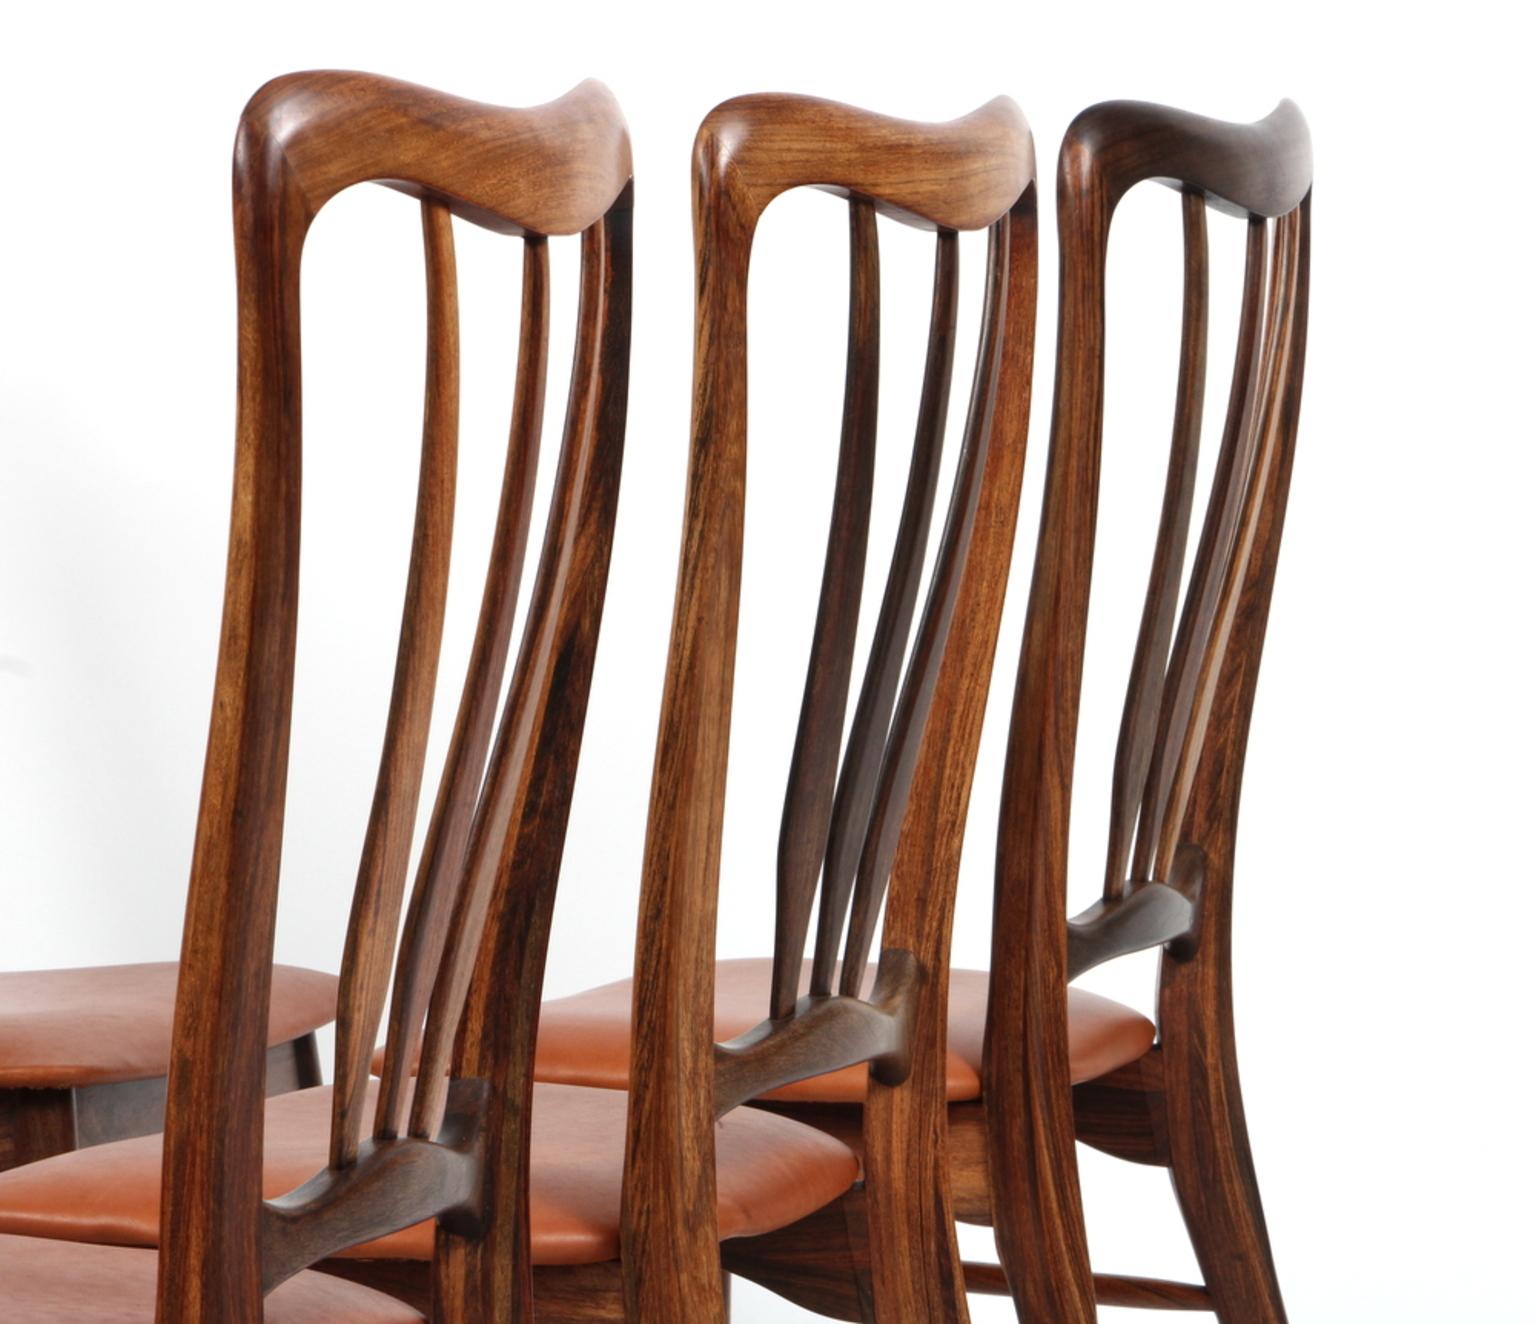 Set of six Niels Koefoed dining chairs in rosewood.

New upholstered with cognac aniline leather.

Made by Koefoeds Møbelfabrik.